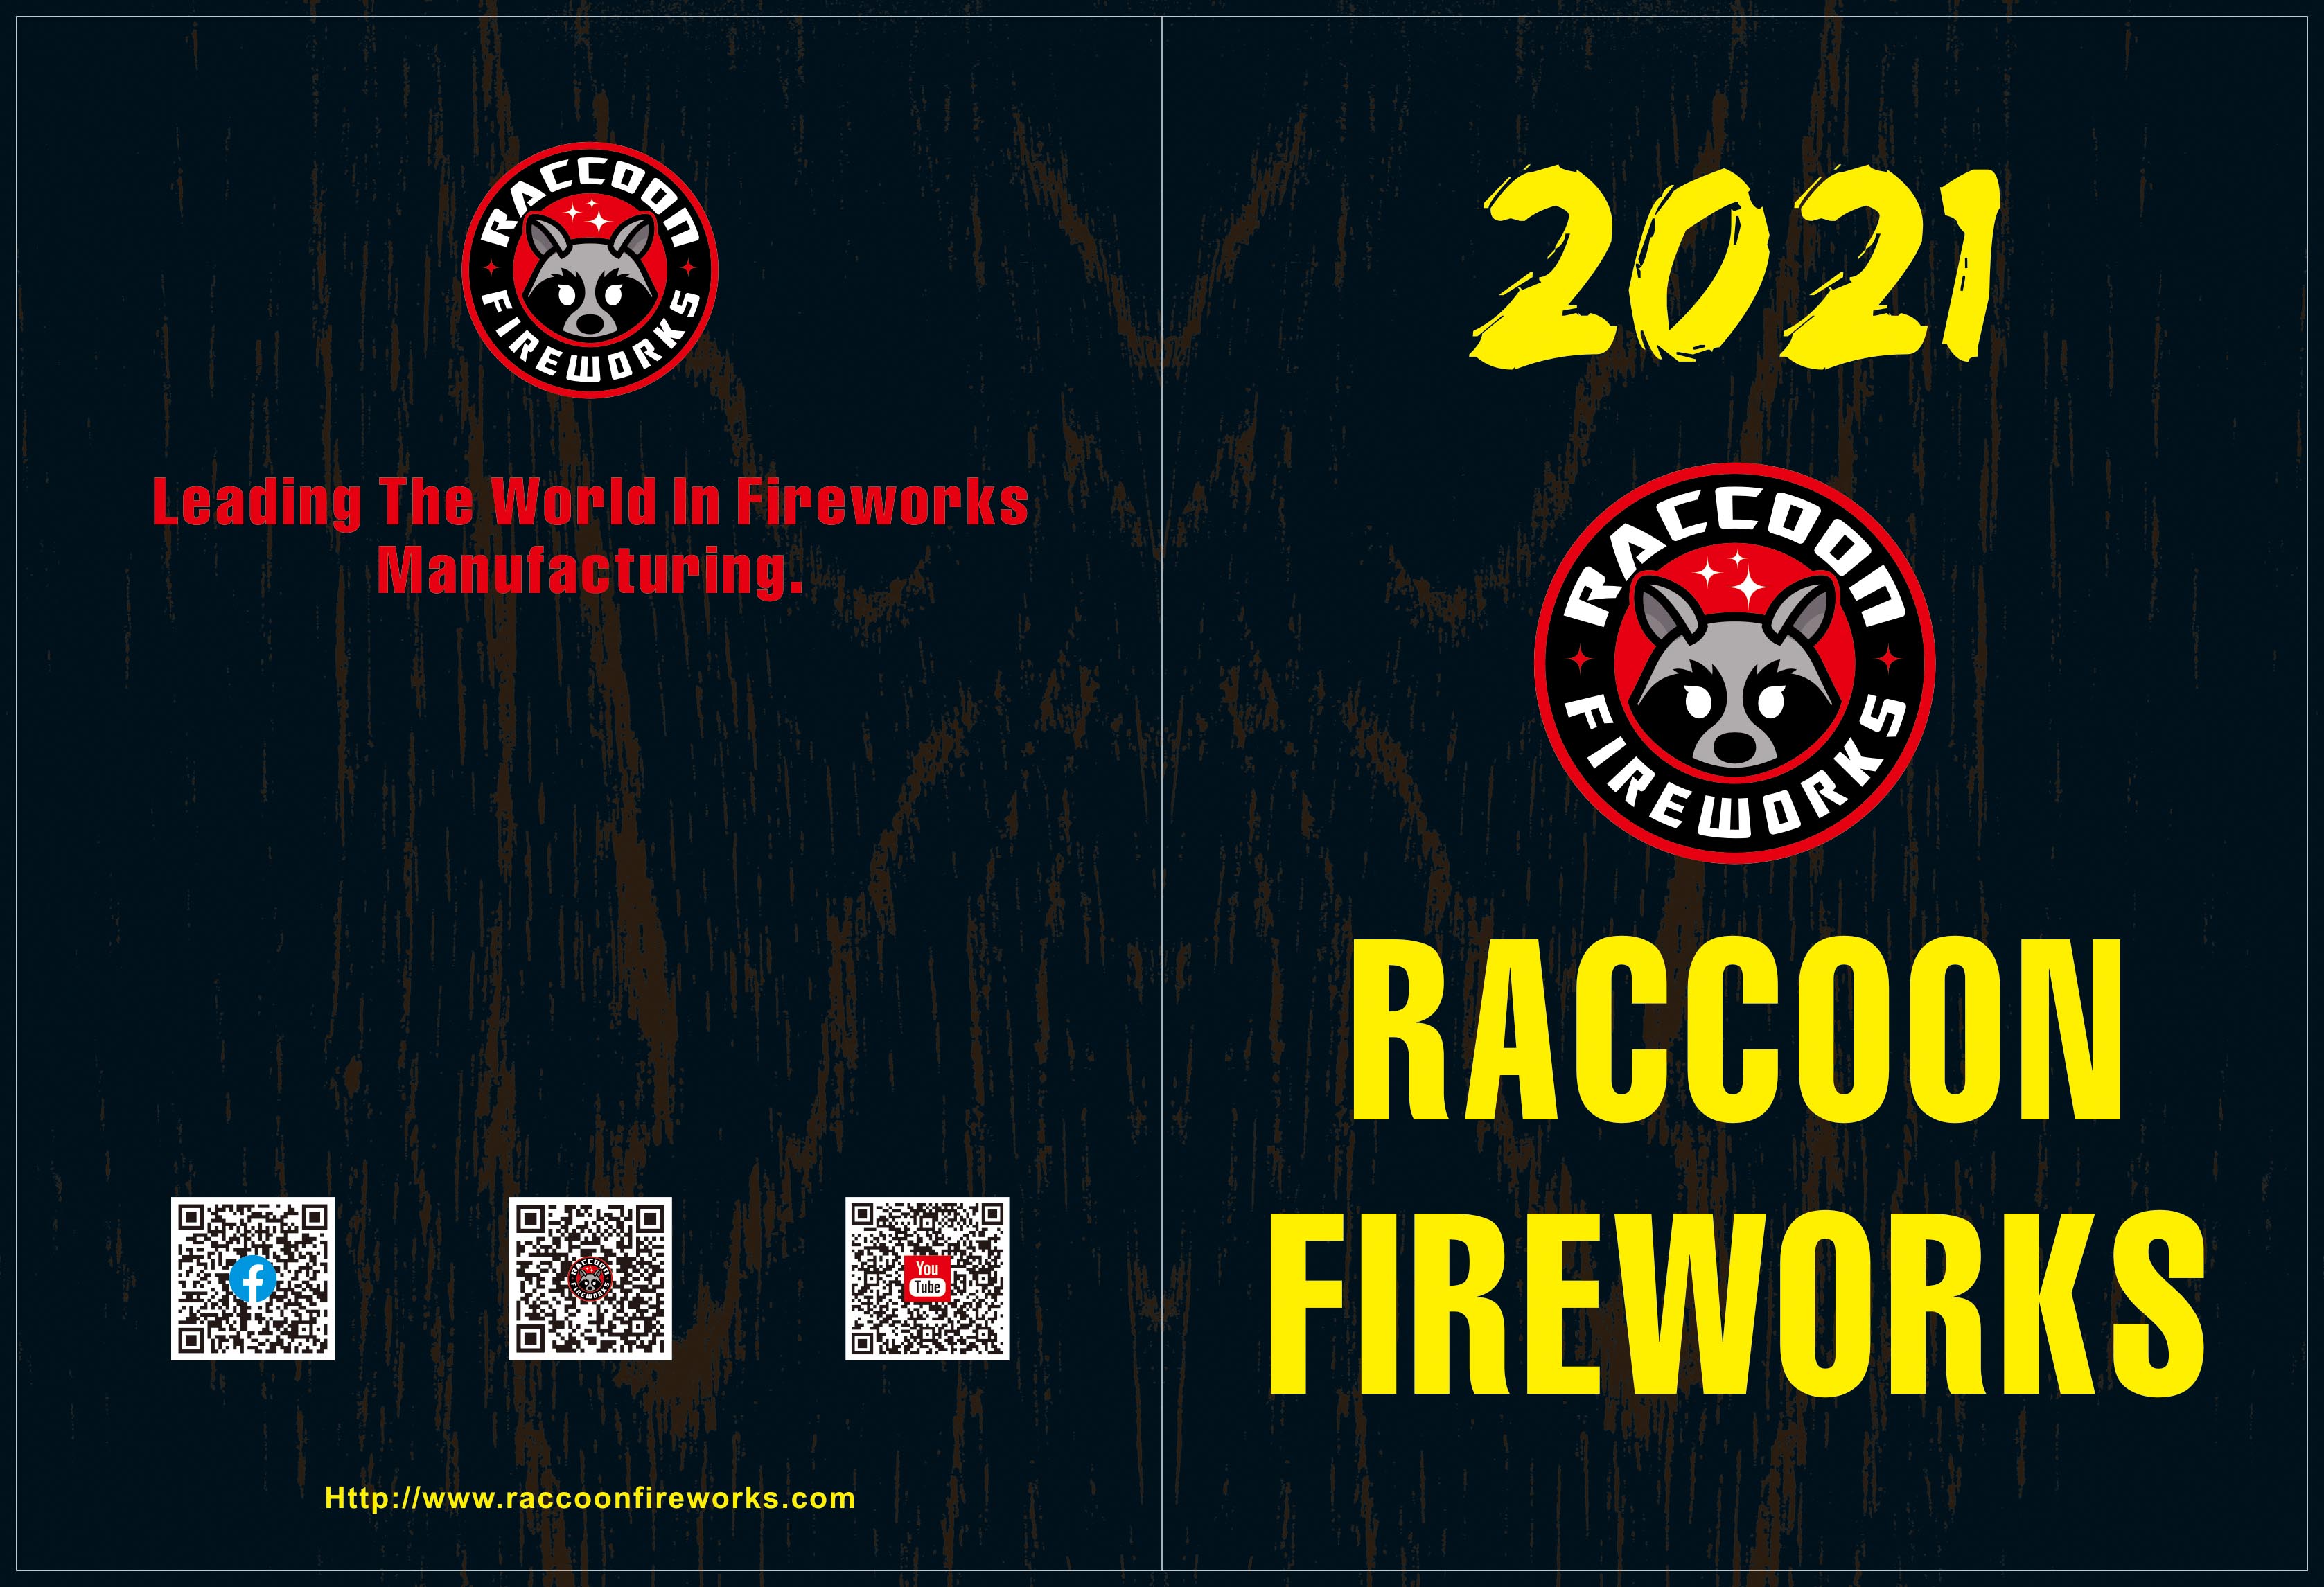 #Raccoon FIreworks New Catalog of New Items for 2021#